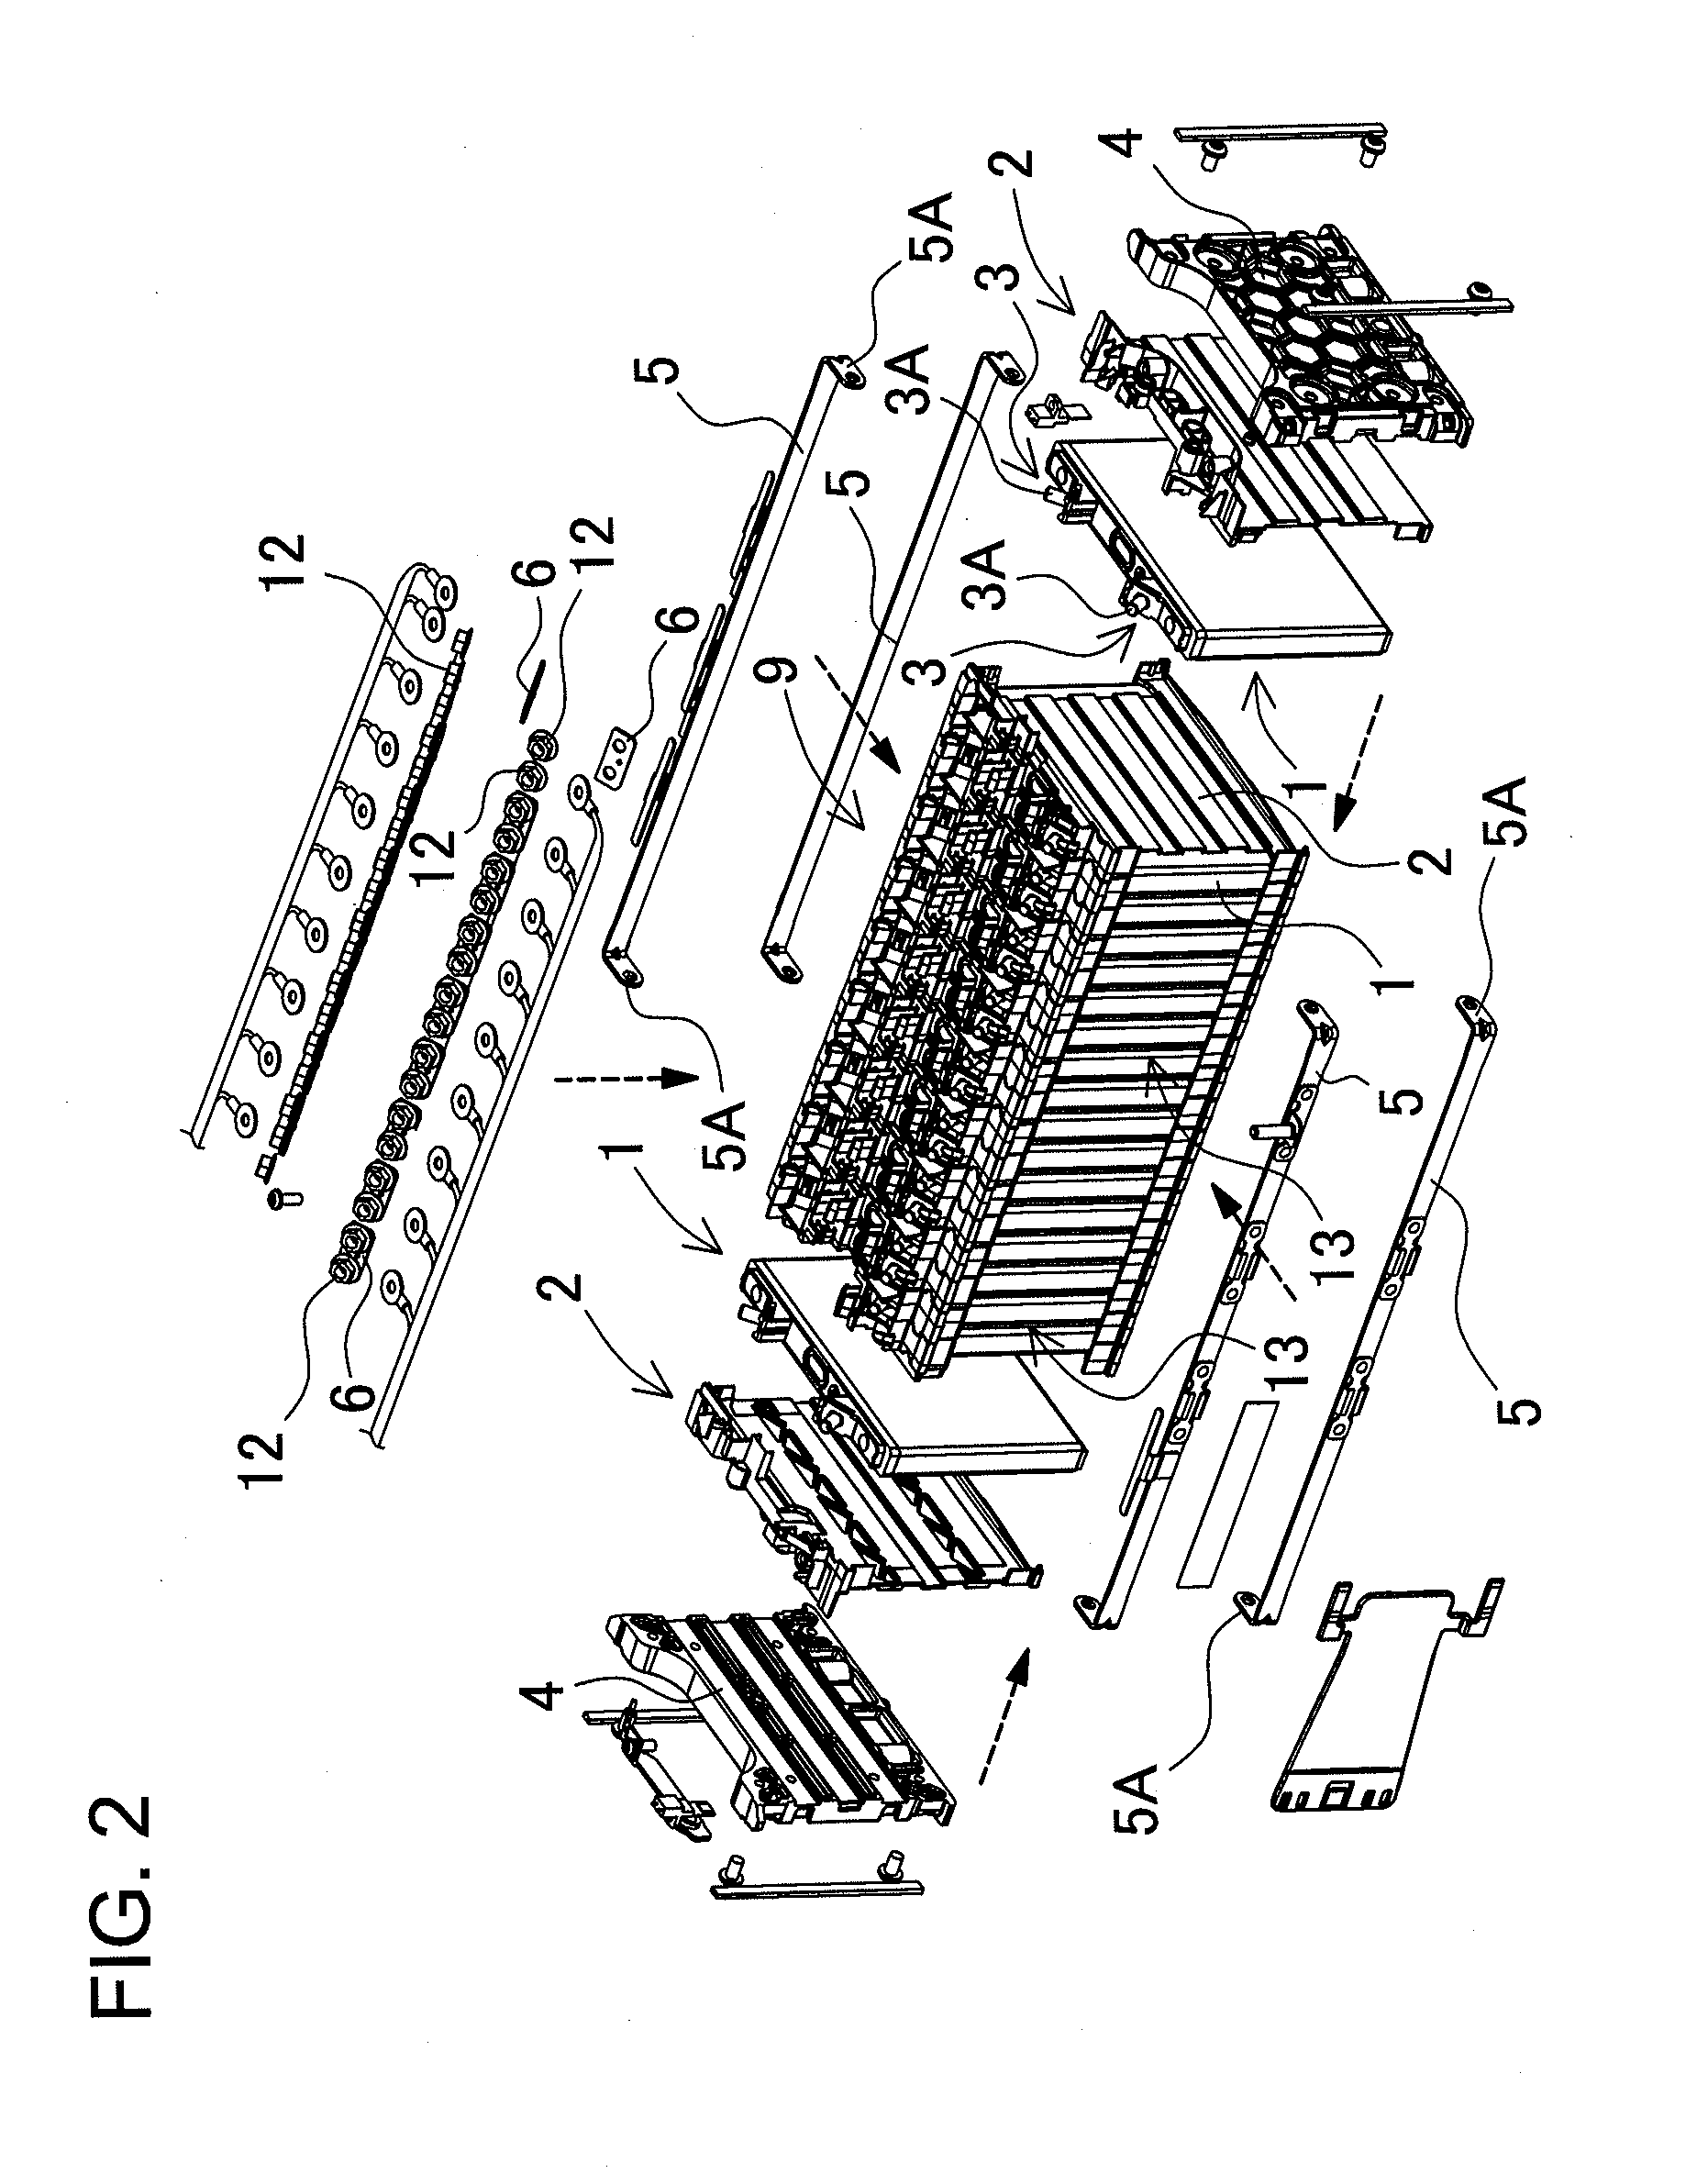 Battery array, battery separator, and vehicle equipped with battery array